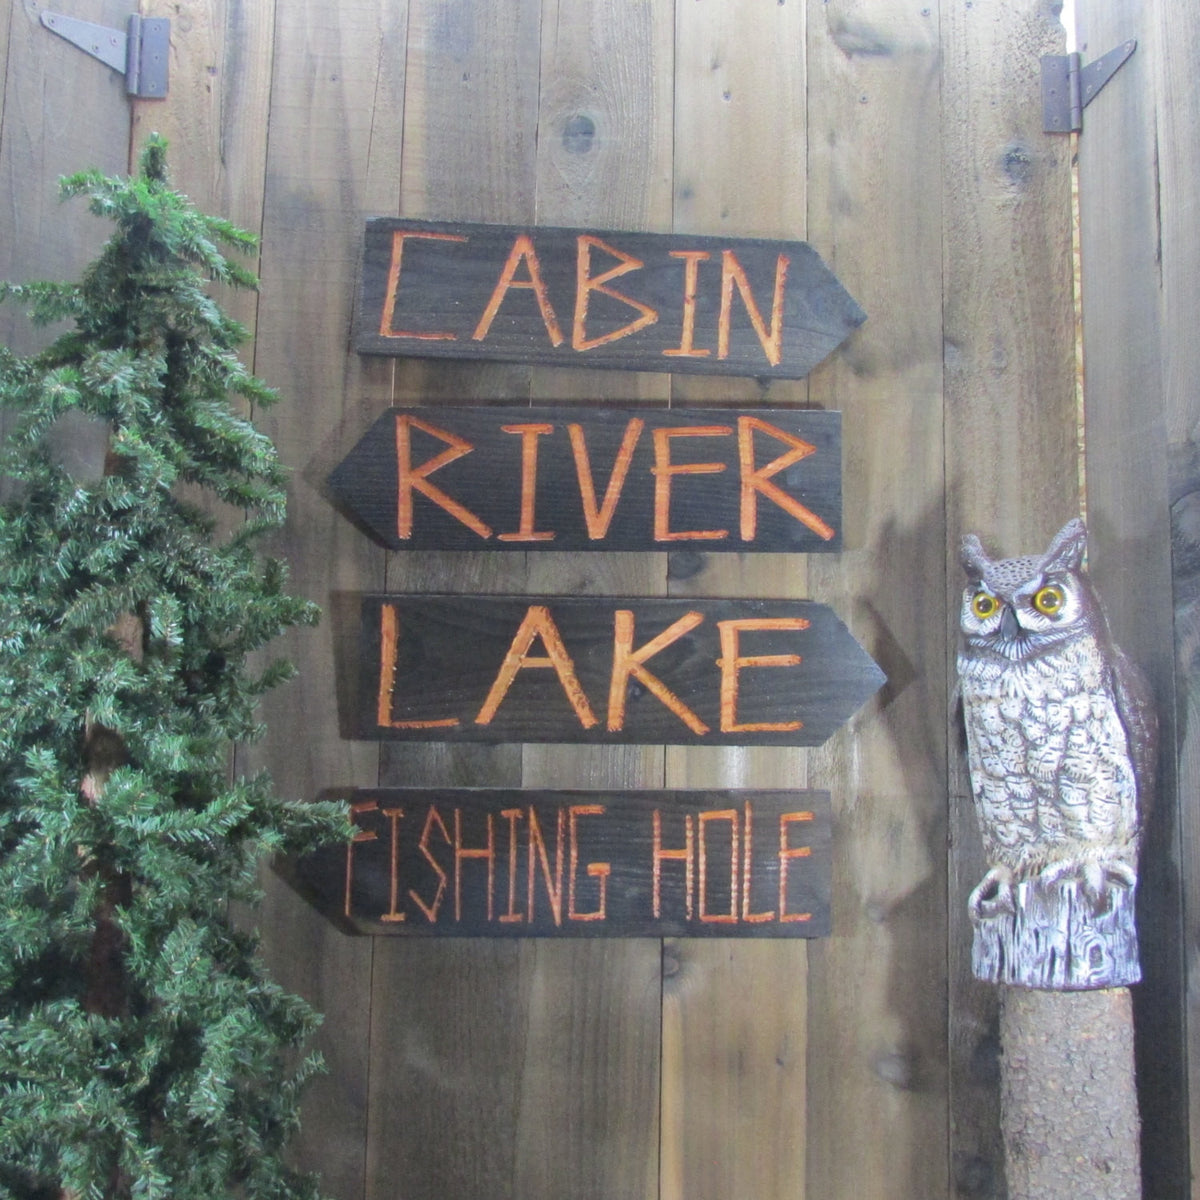 Cabin River Lake Fishing Hole Directional Lawn Ornament Sign